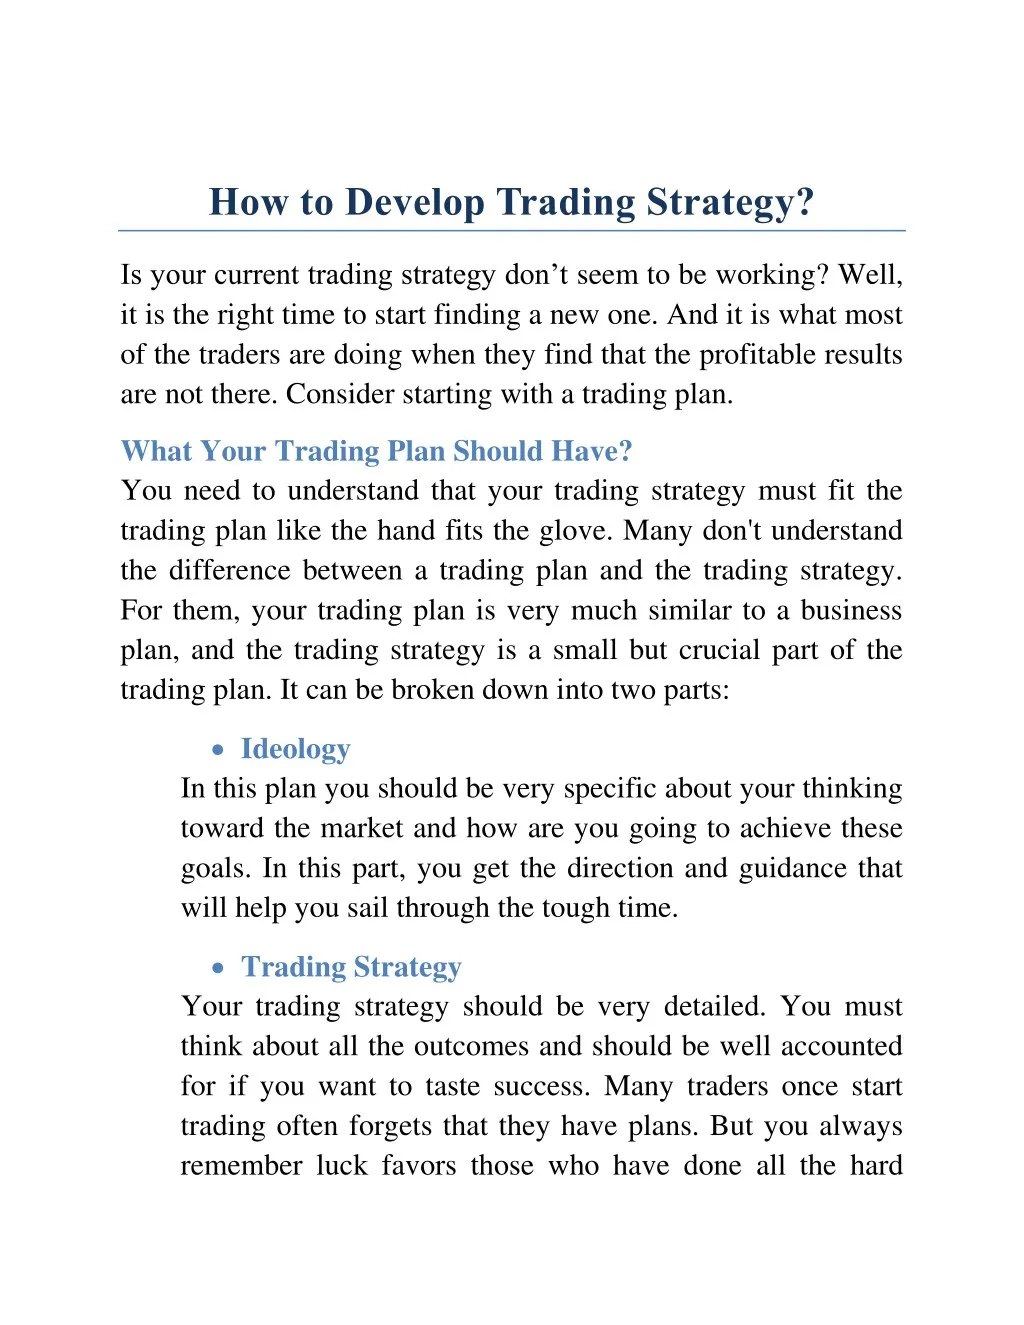 how to develop trading strategy